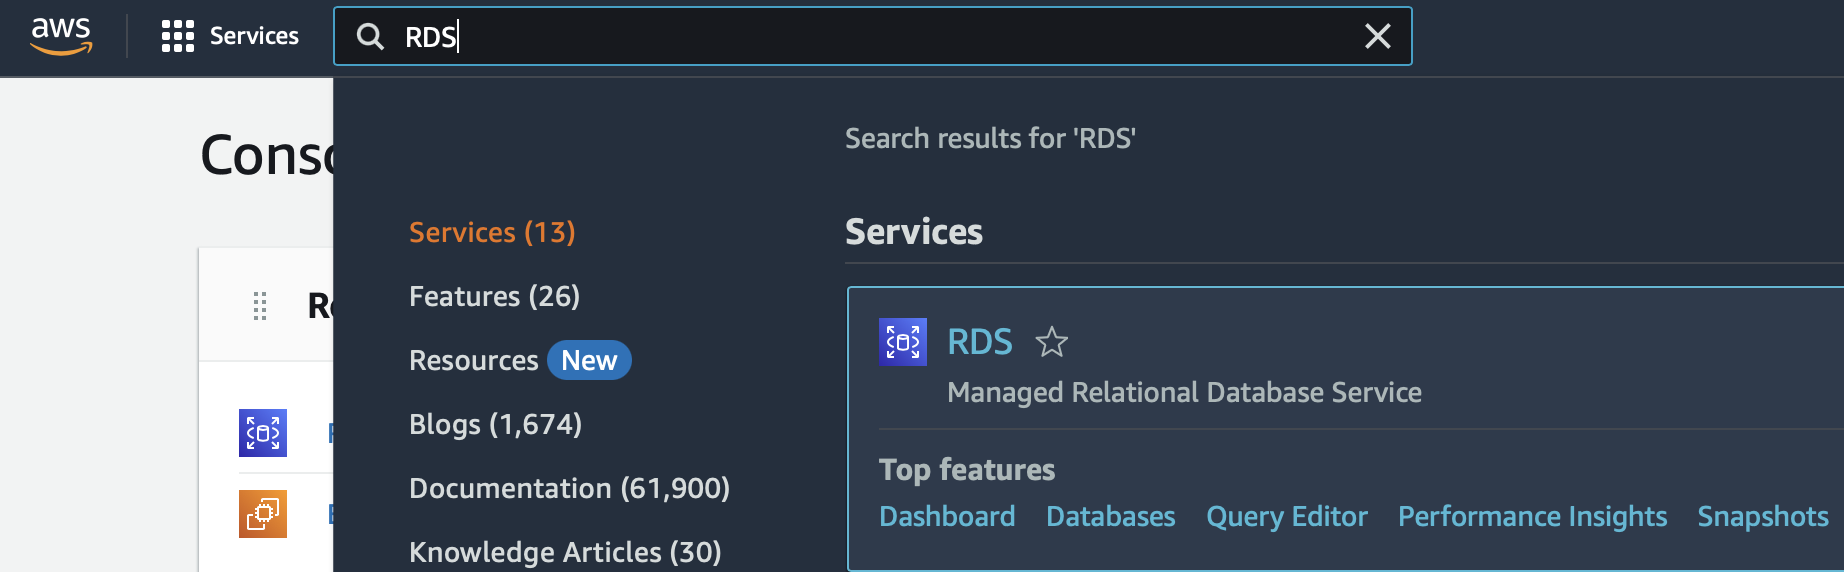 Search for RDS